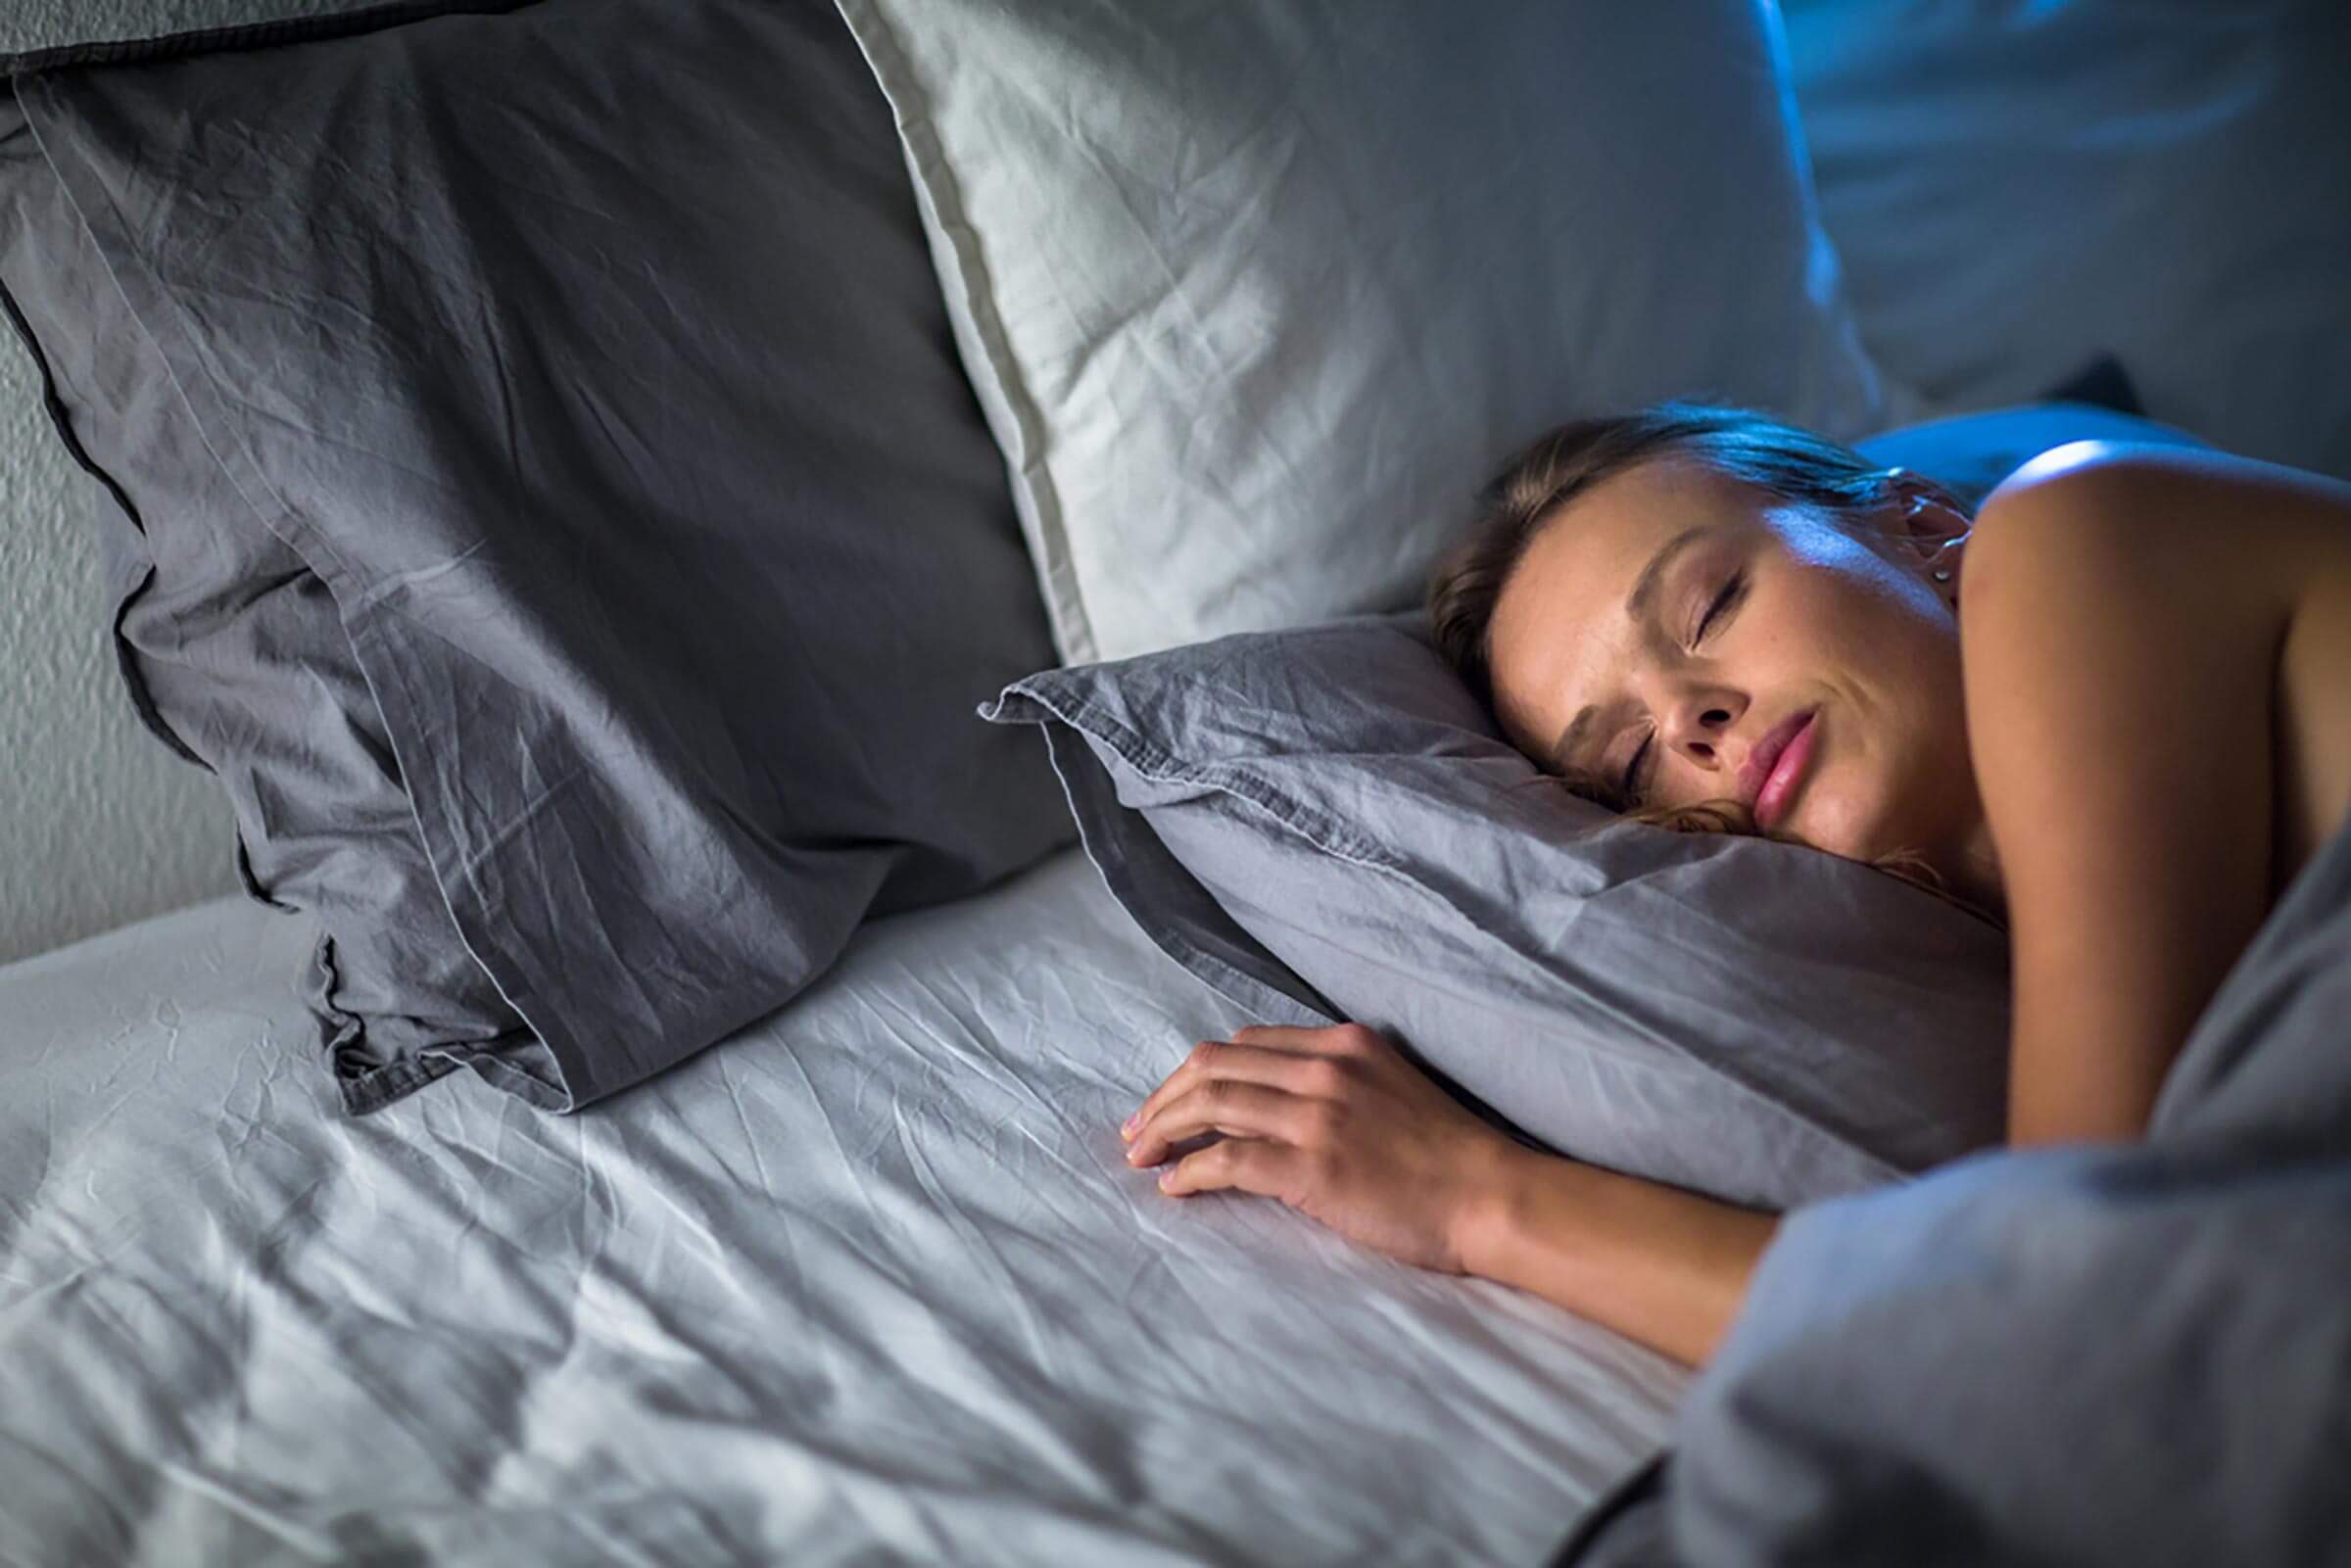 8 Simple Ways You Can Get Smarter While You Sleep